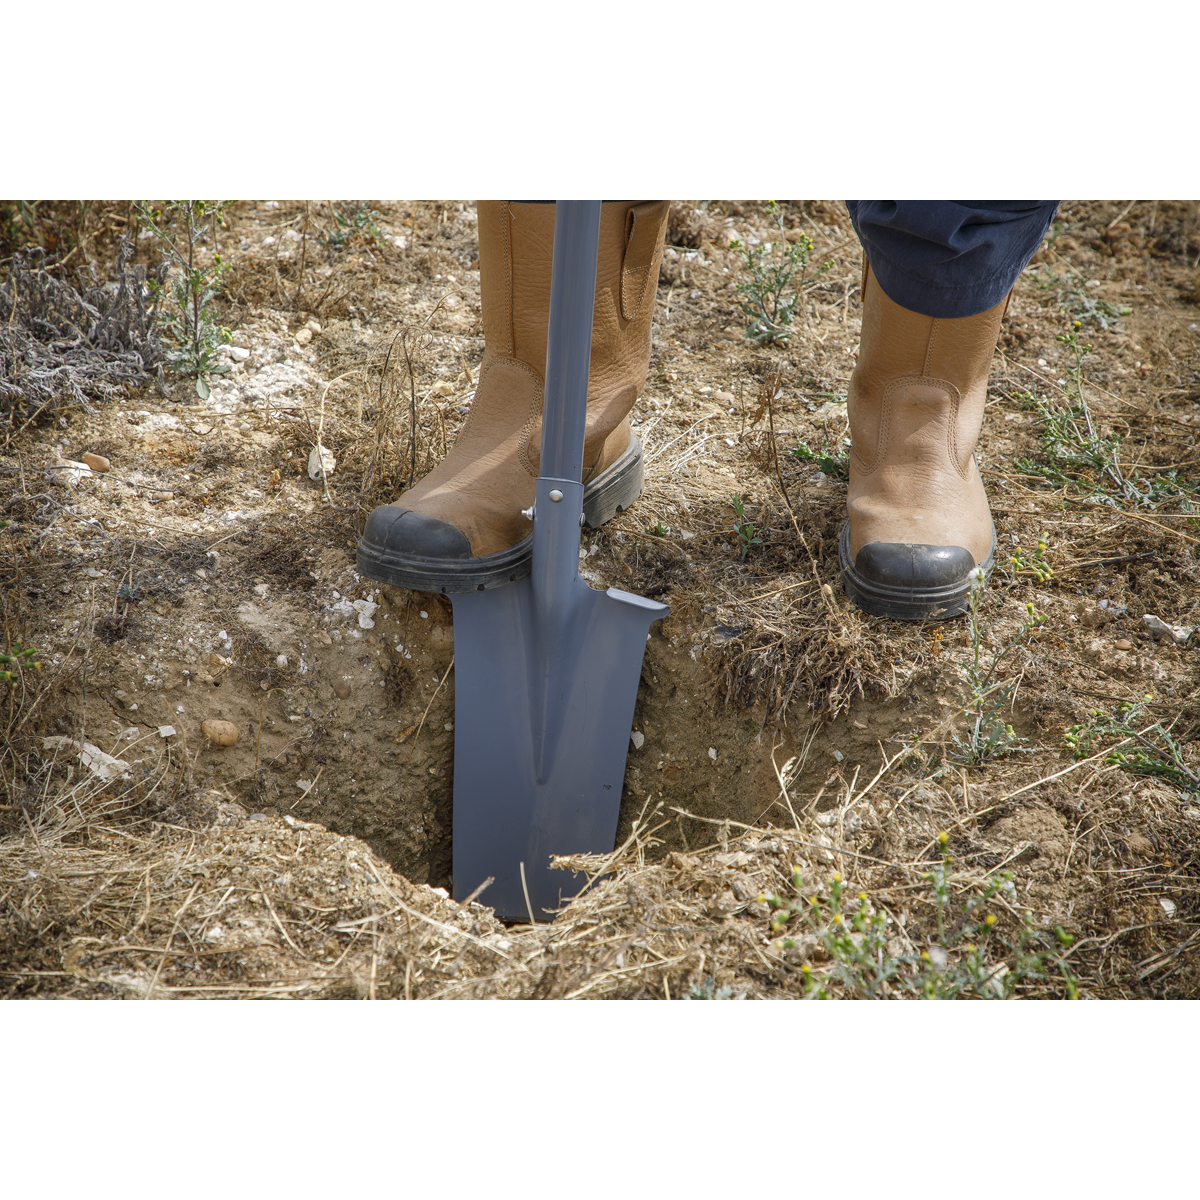 Spade is very versatile and can break all ground types and chop through roots.